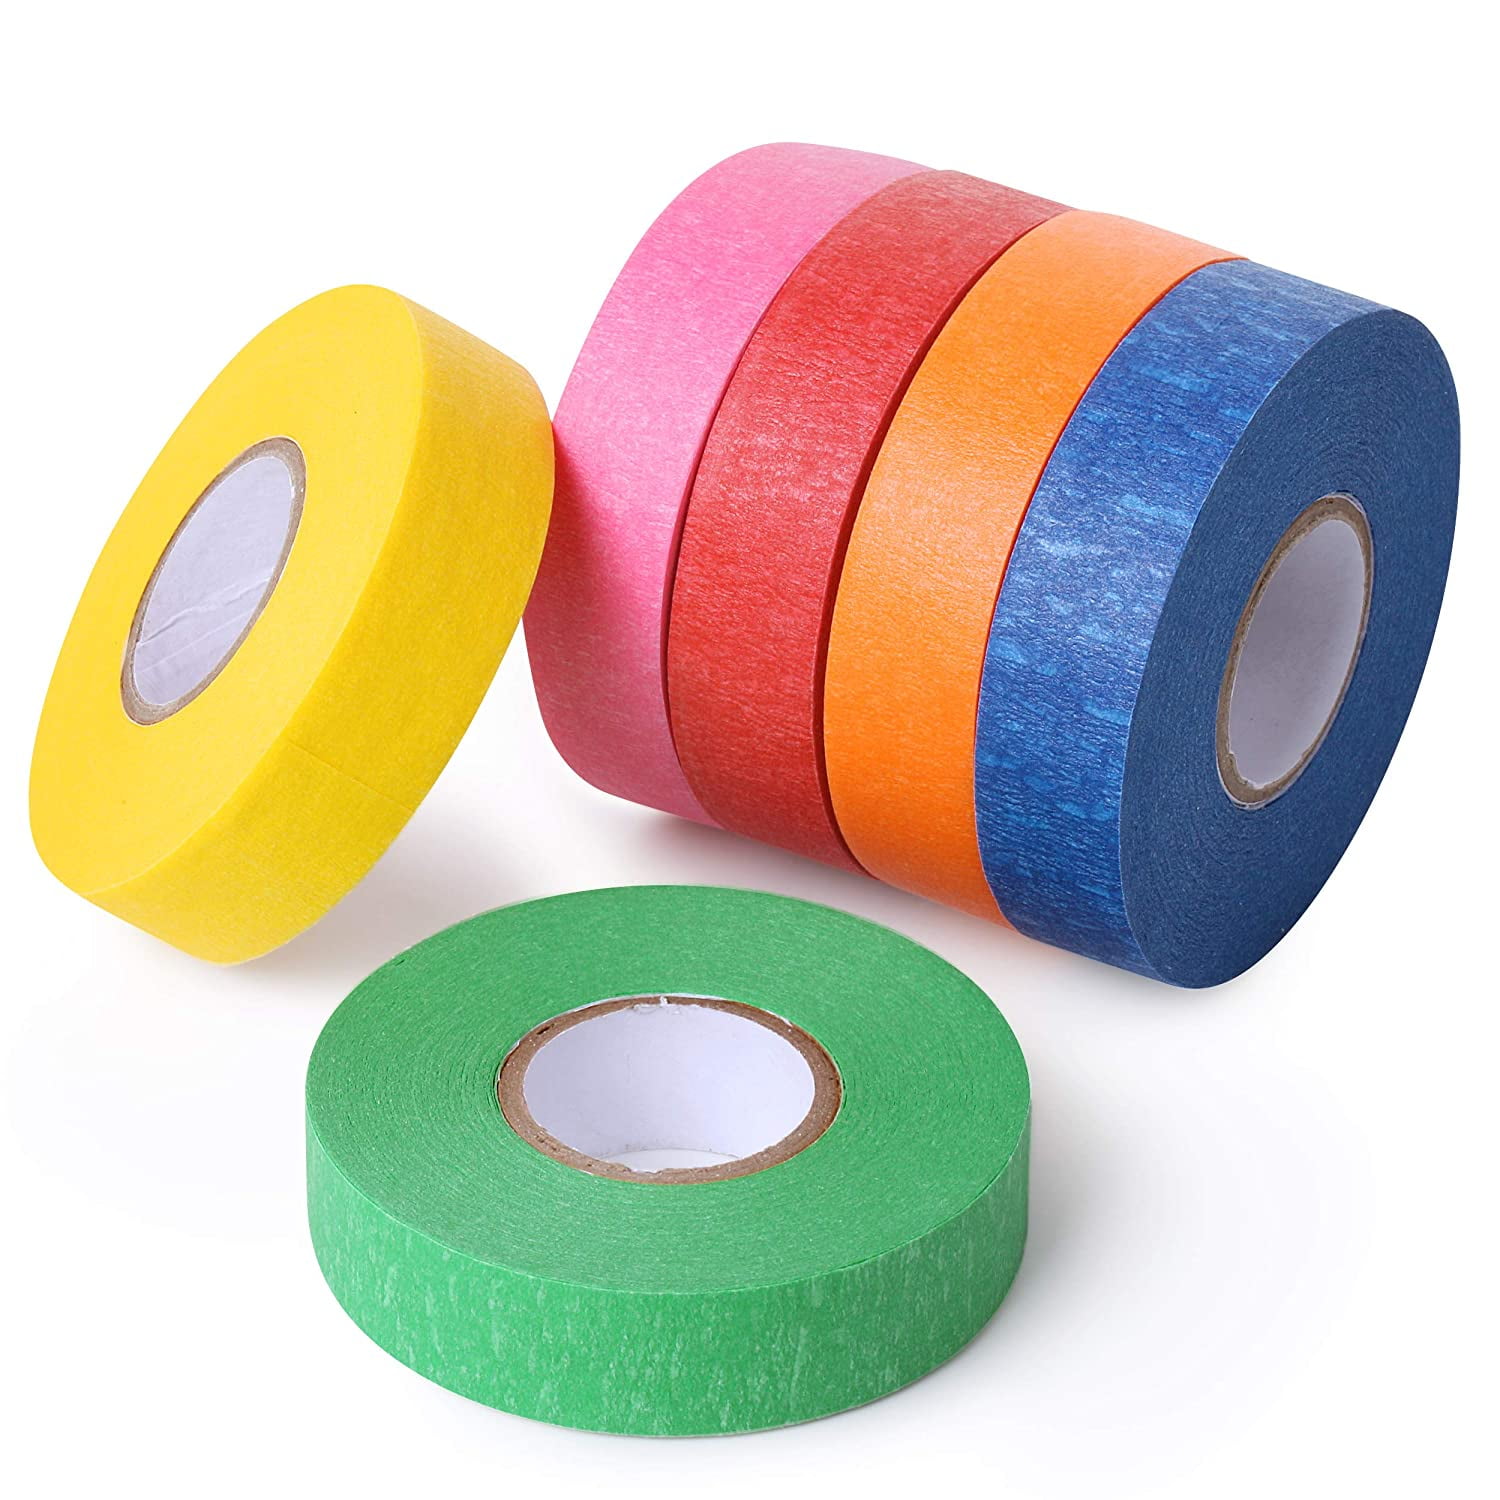  12 Pack Colored Masking Tape, DaKuan Colored Painters